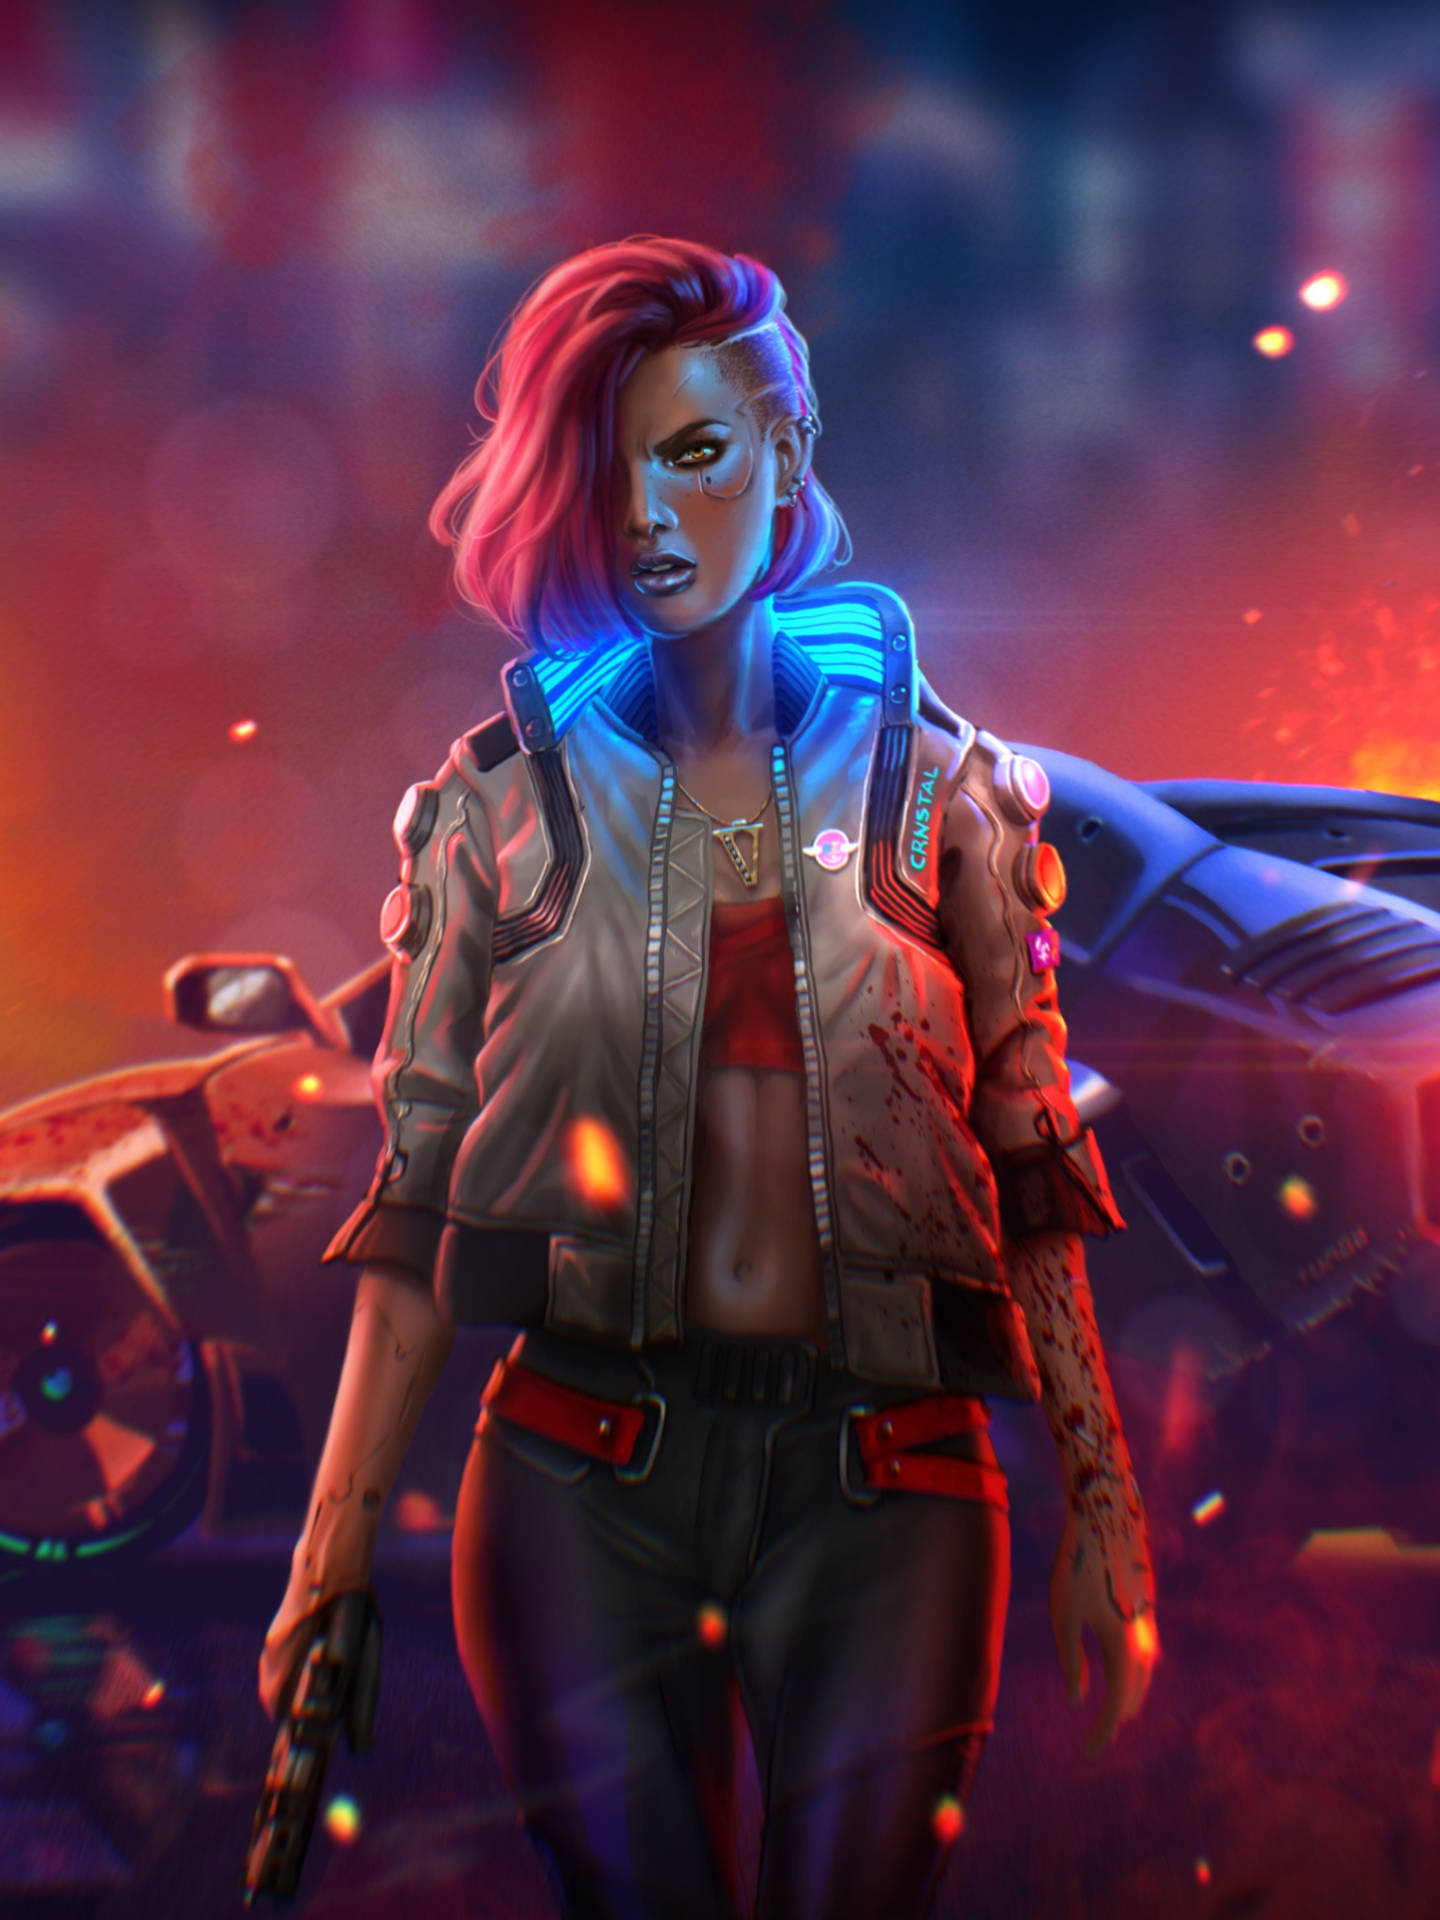 V In Cyberpunk 2077 For Android